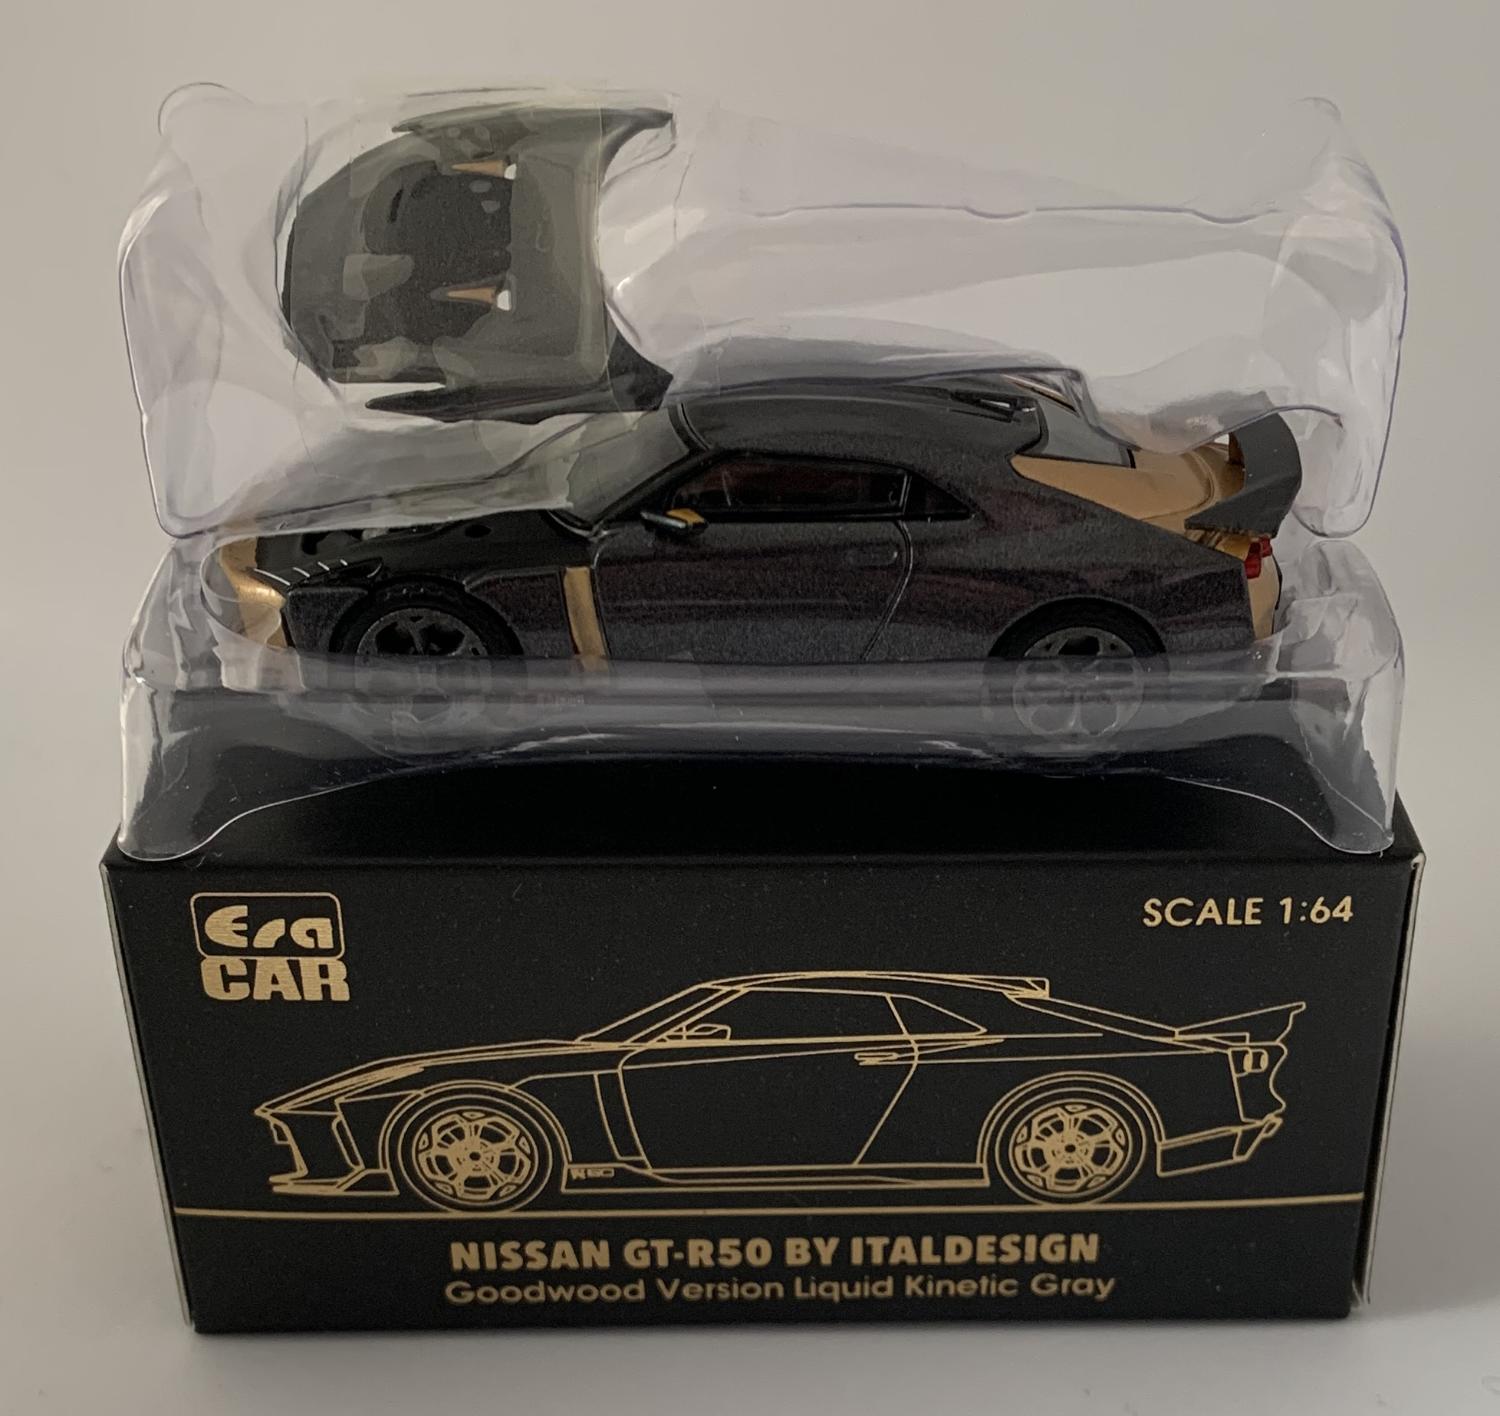 good reproduction of the Nissan GT-R50 with detail throughout, all authentically recreated. The model is presented in a box, the car is approx. 7.5 cm long and the box is 9 cm long